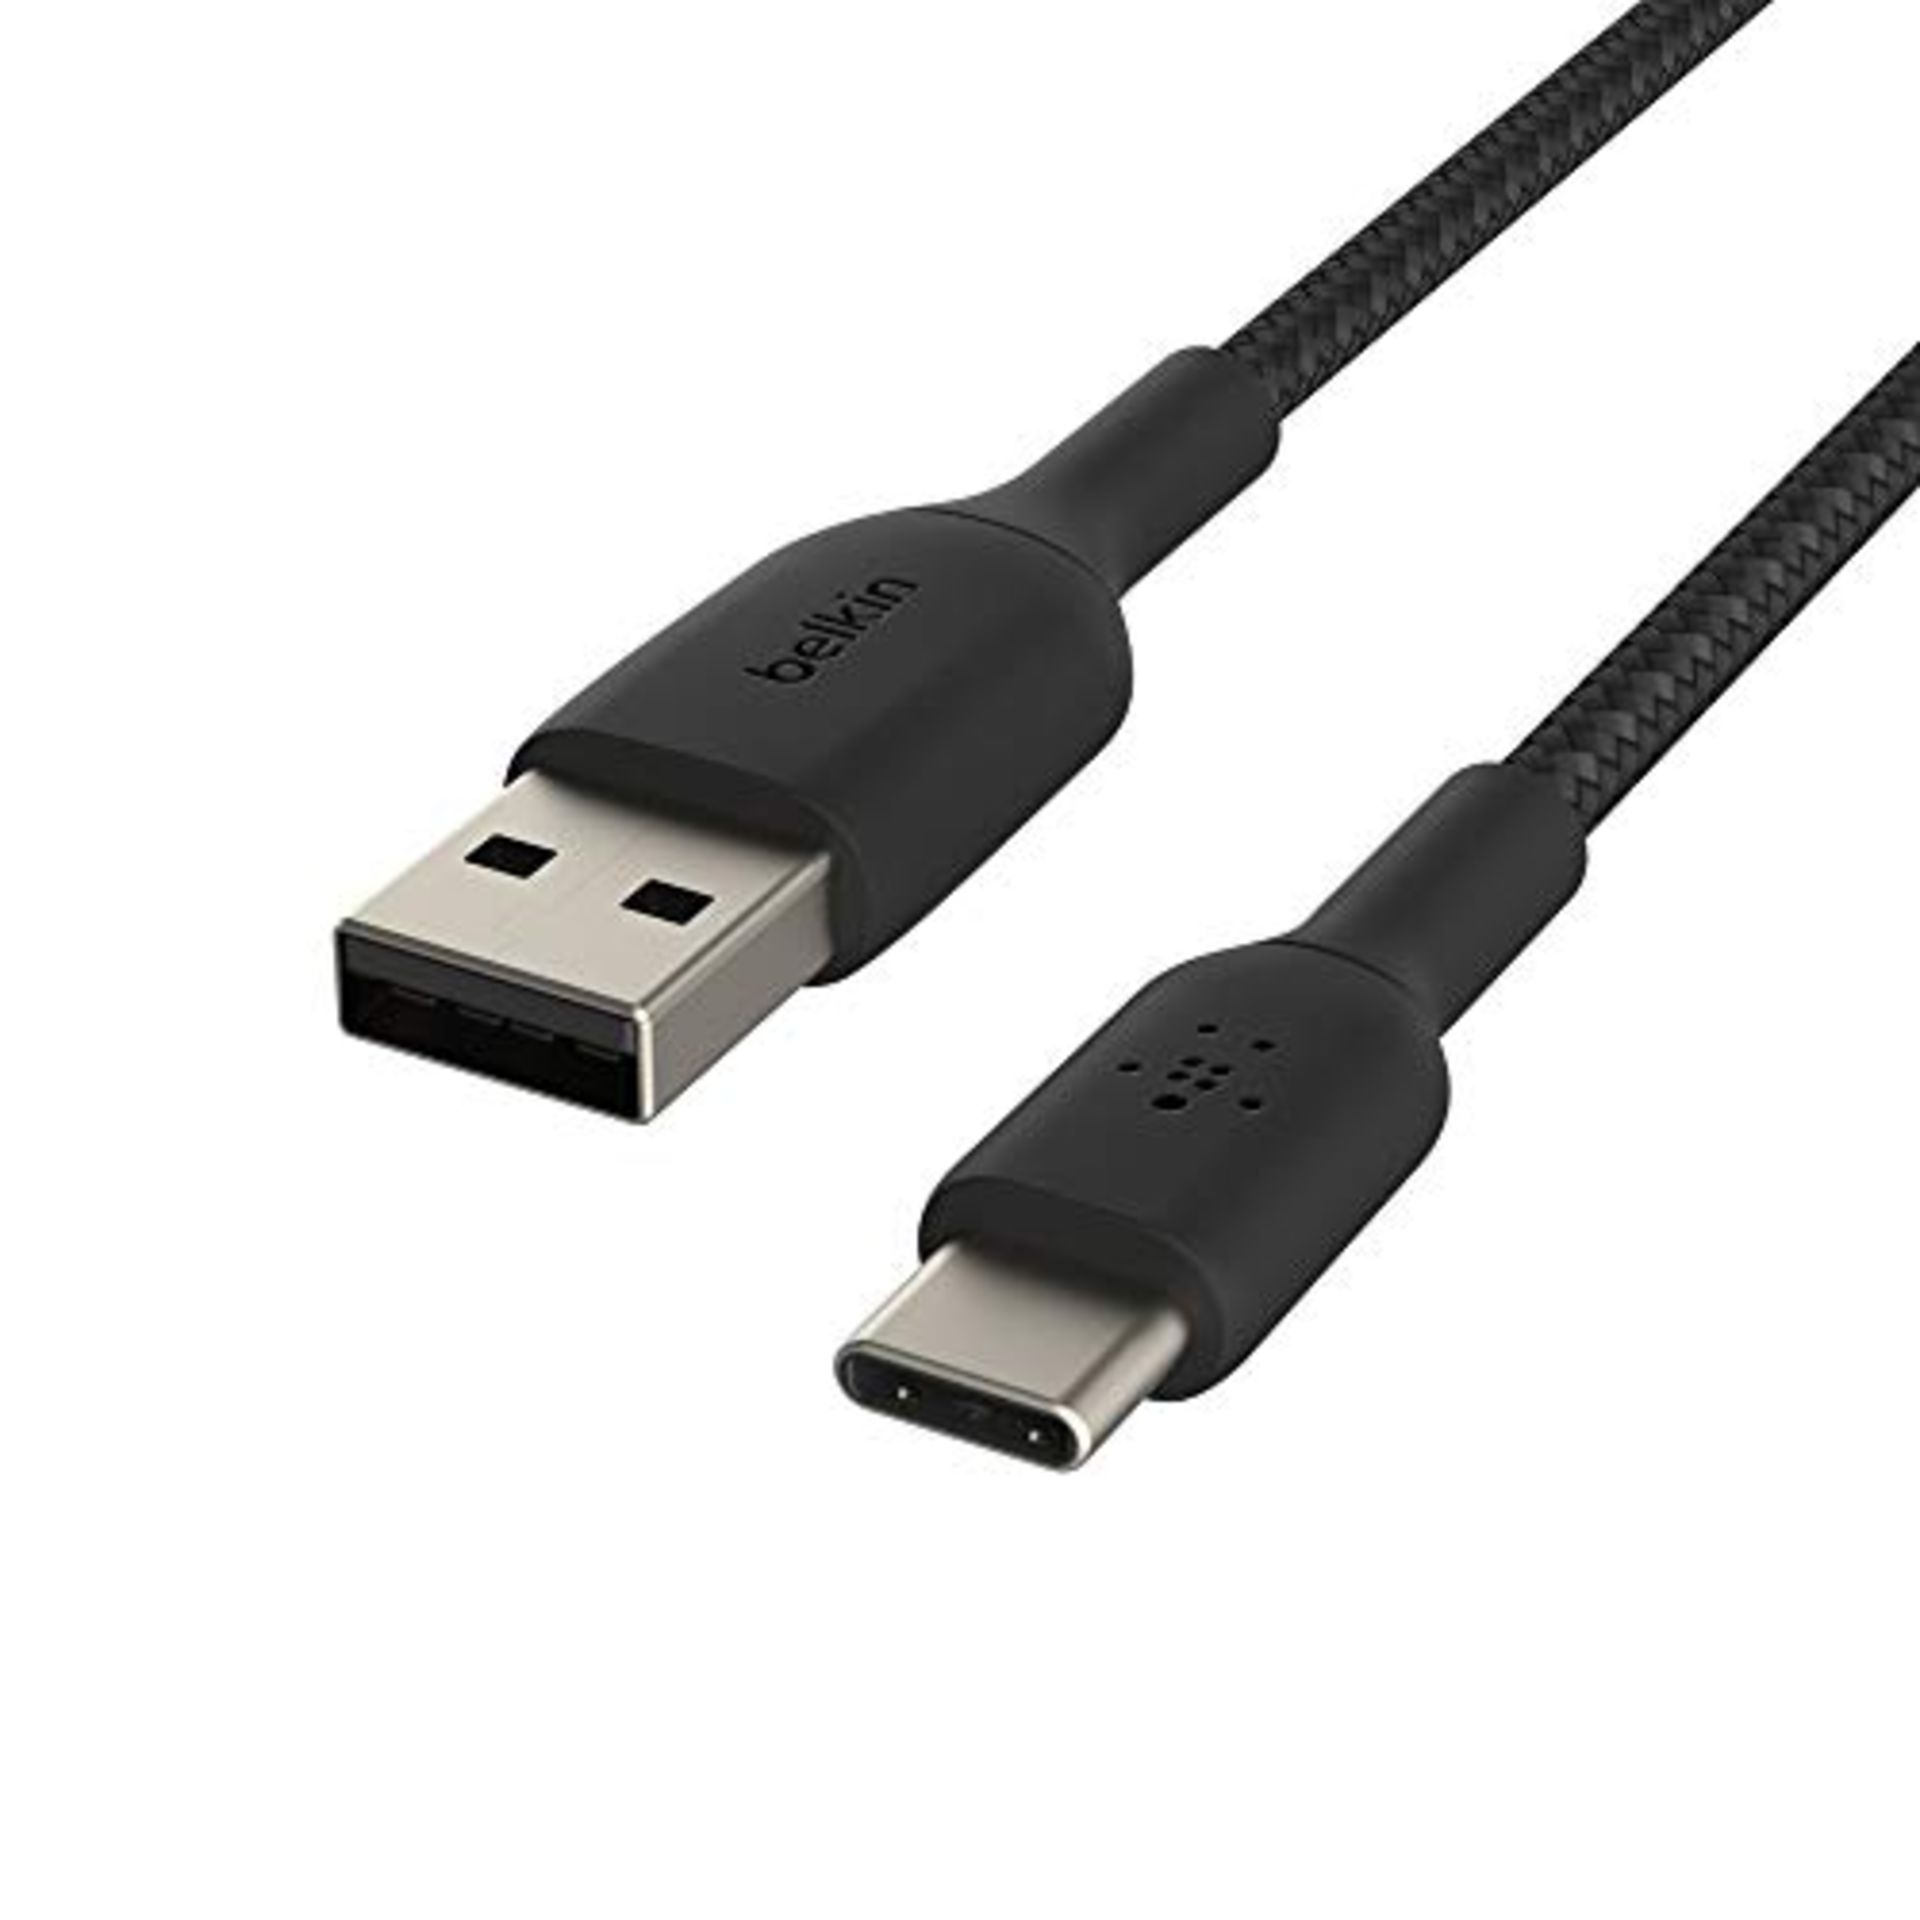 Belkin BoostCharge Braided USB C charger cable, USB-C to USB-A cable, USB type C charg